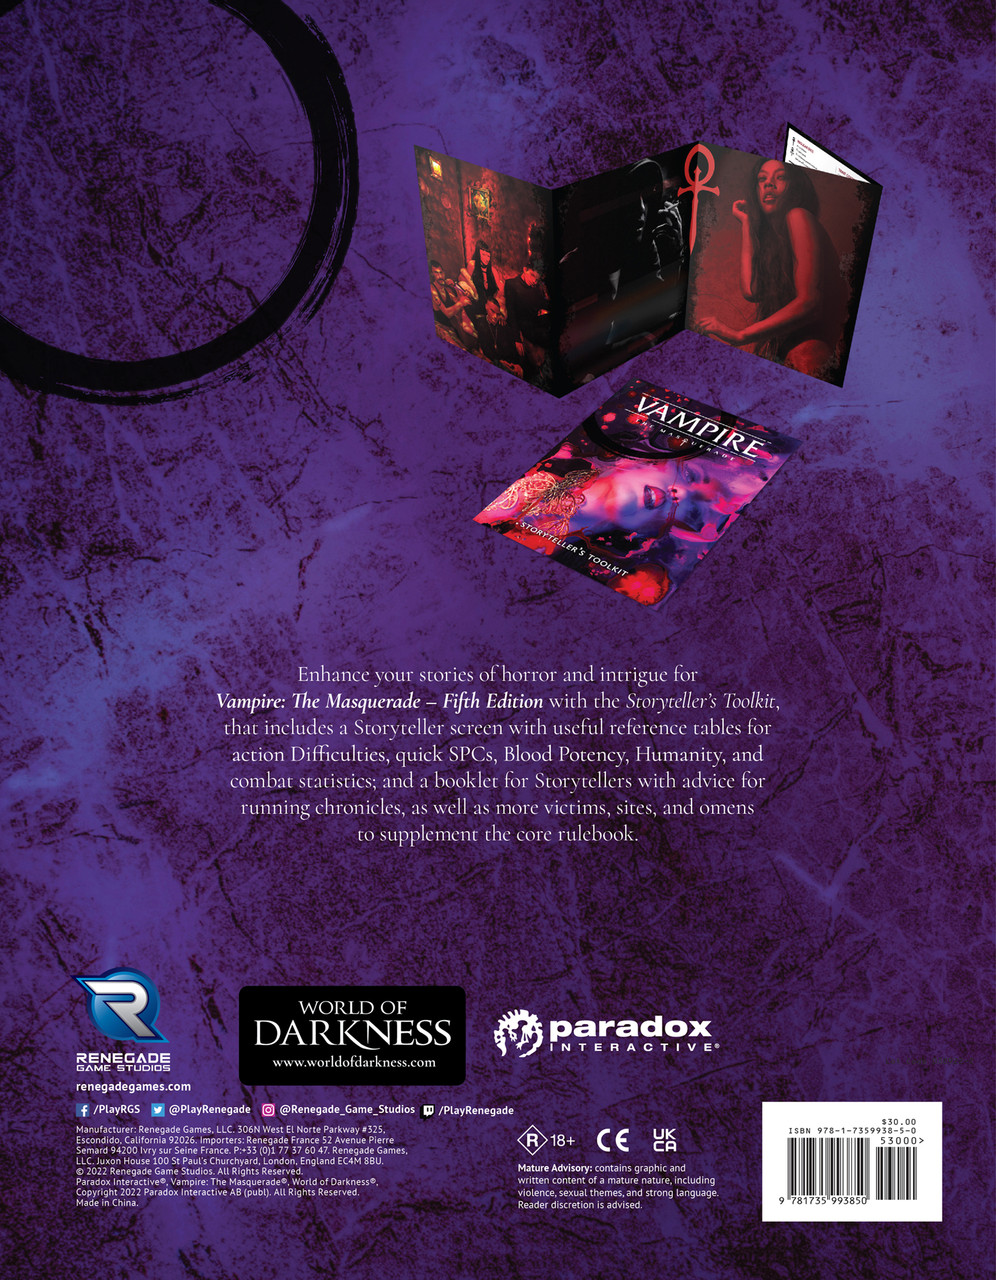 Vampire: The Masquerade 5th Edition Storyteller Bundle  Roll20  Marketplace: Digital goods for online tabletop gaming